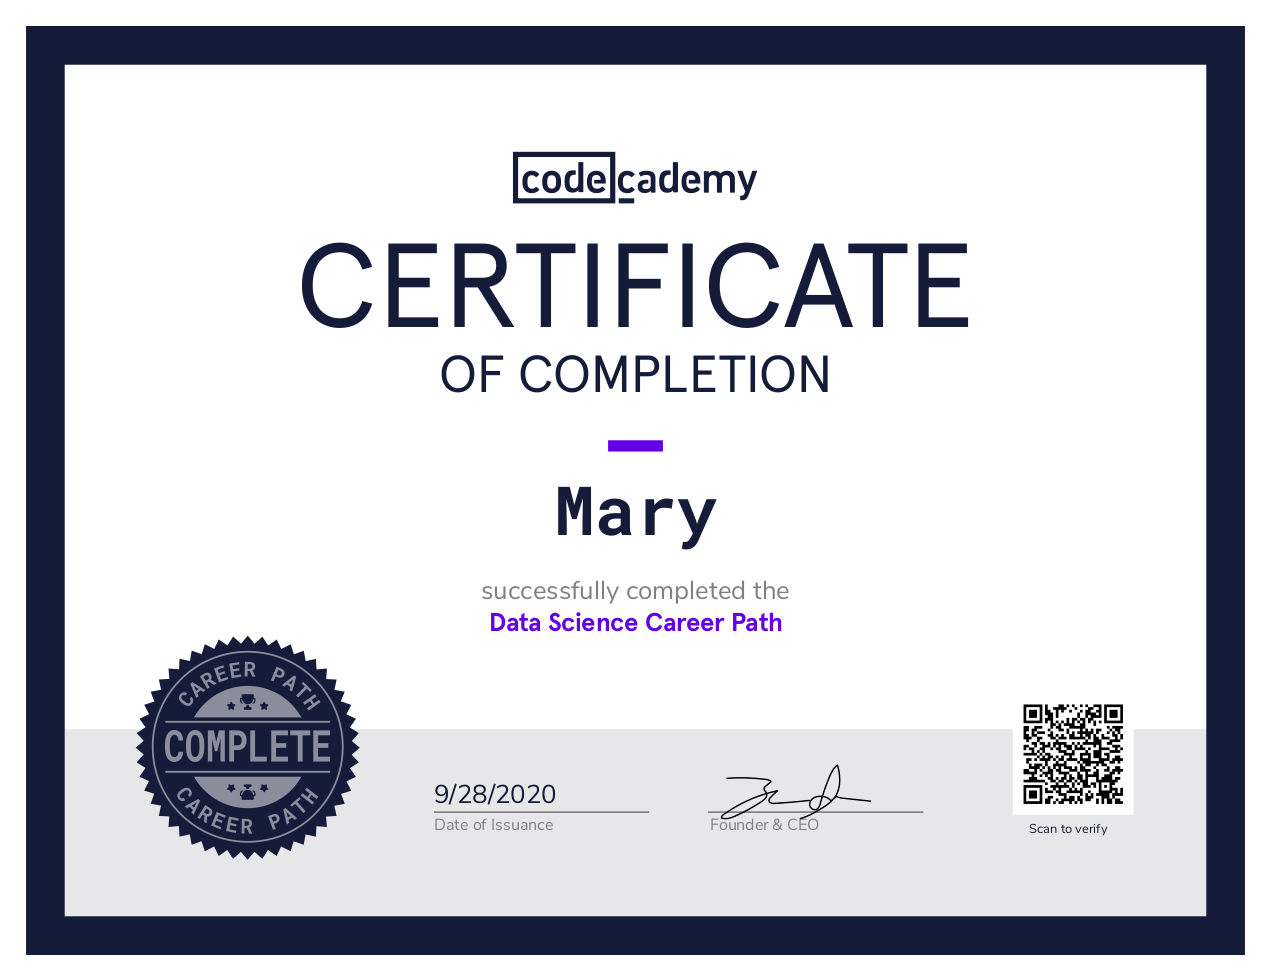 "codecademy Certificate of Completion, Mary successfully completed the Data Science Career Path. Date of Issuance: 9/28/2020. Founder of CEO with signature